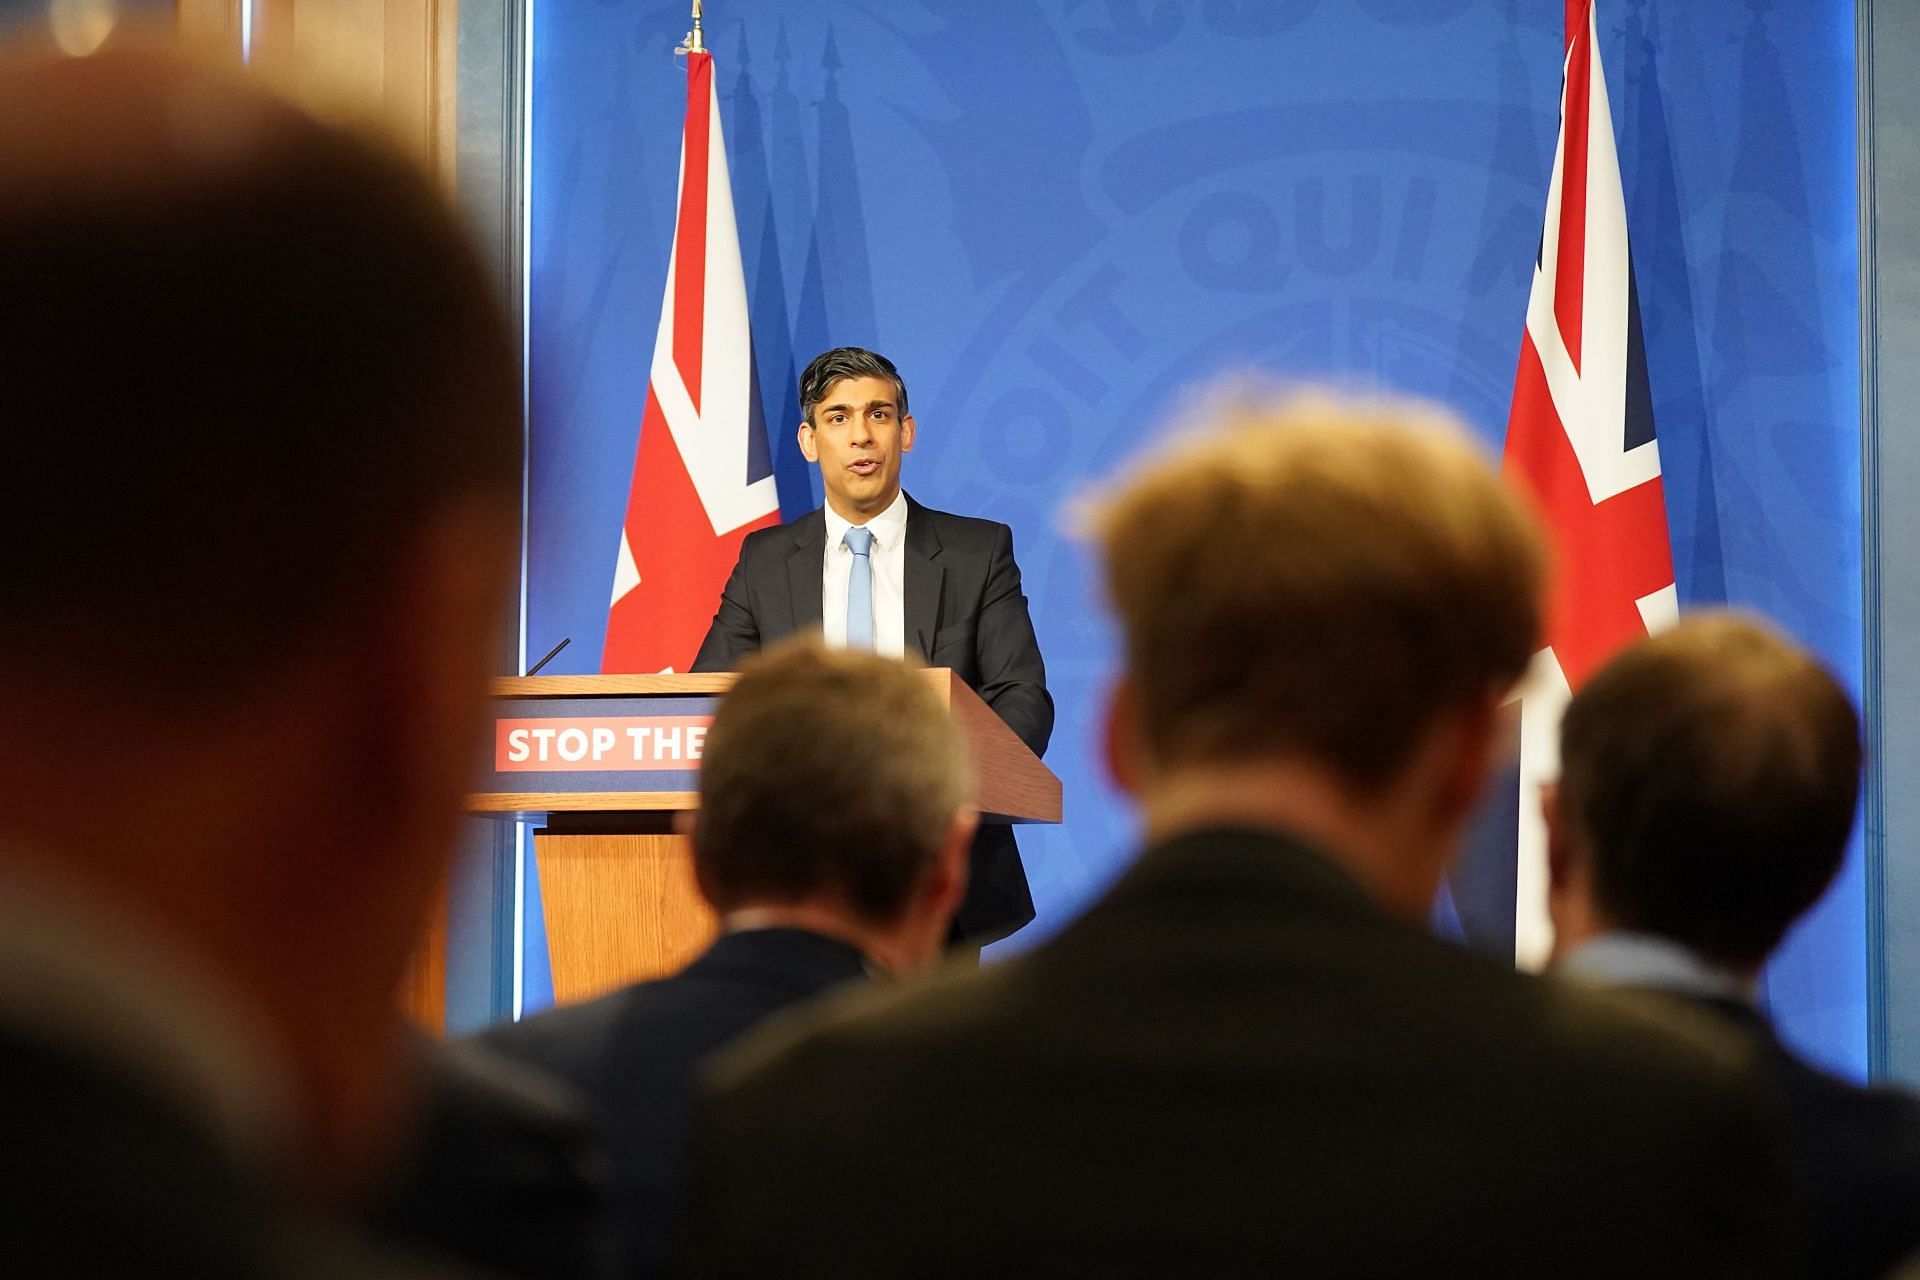 Rishi Sunak holds a press conference on passing the Rwanda Bill (Image via Getty Images)